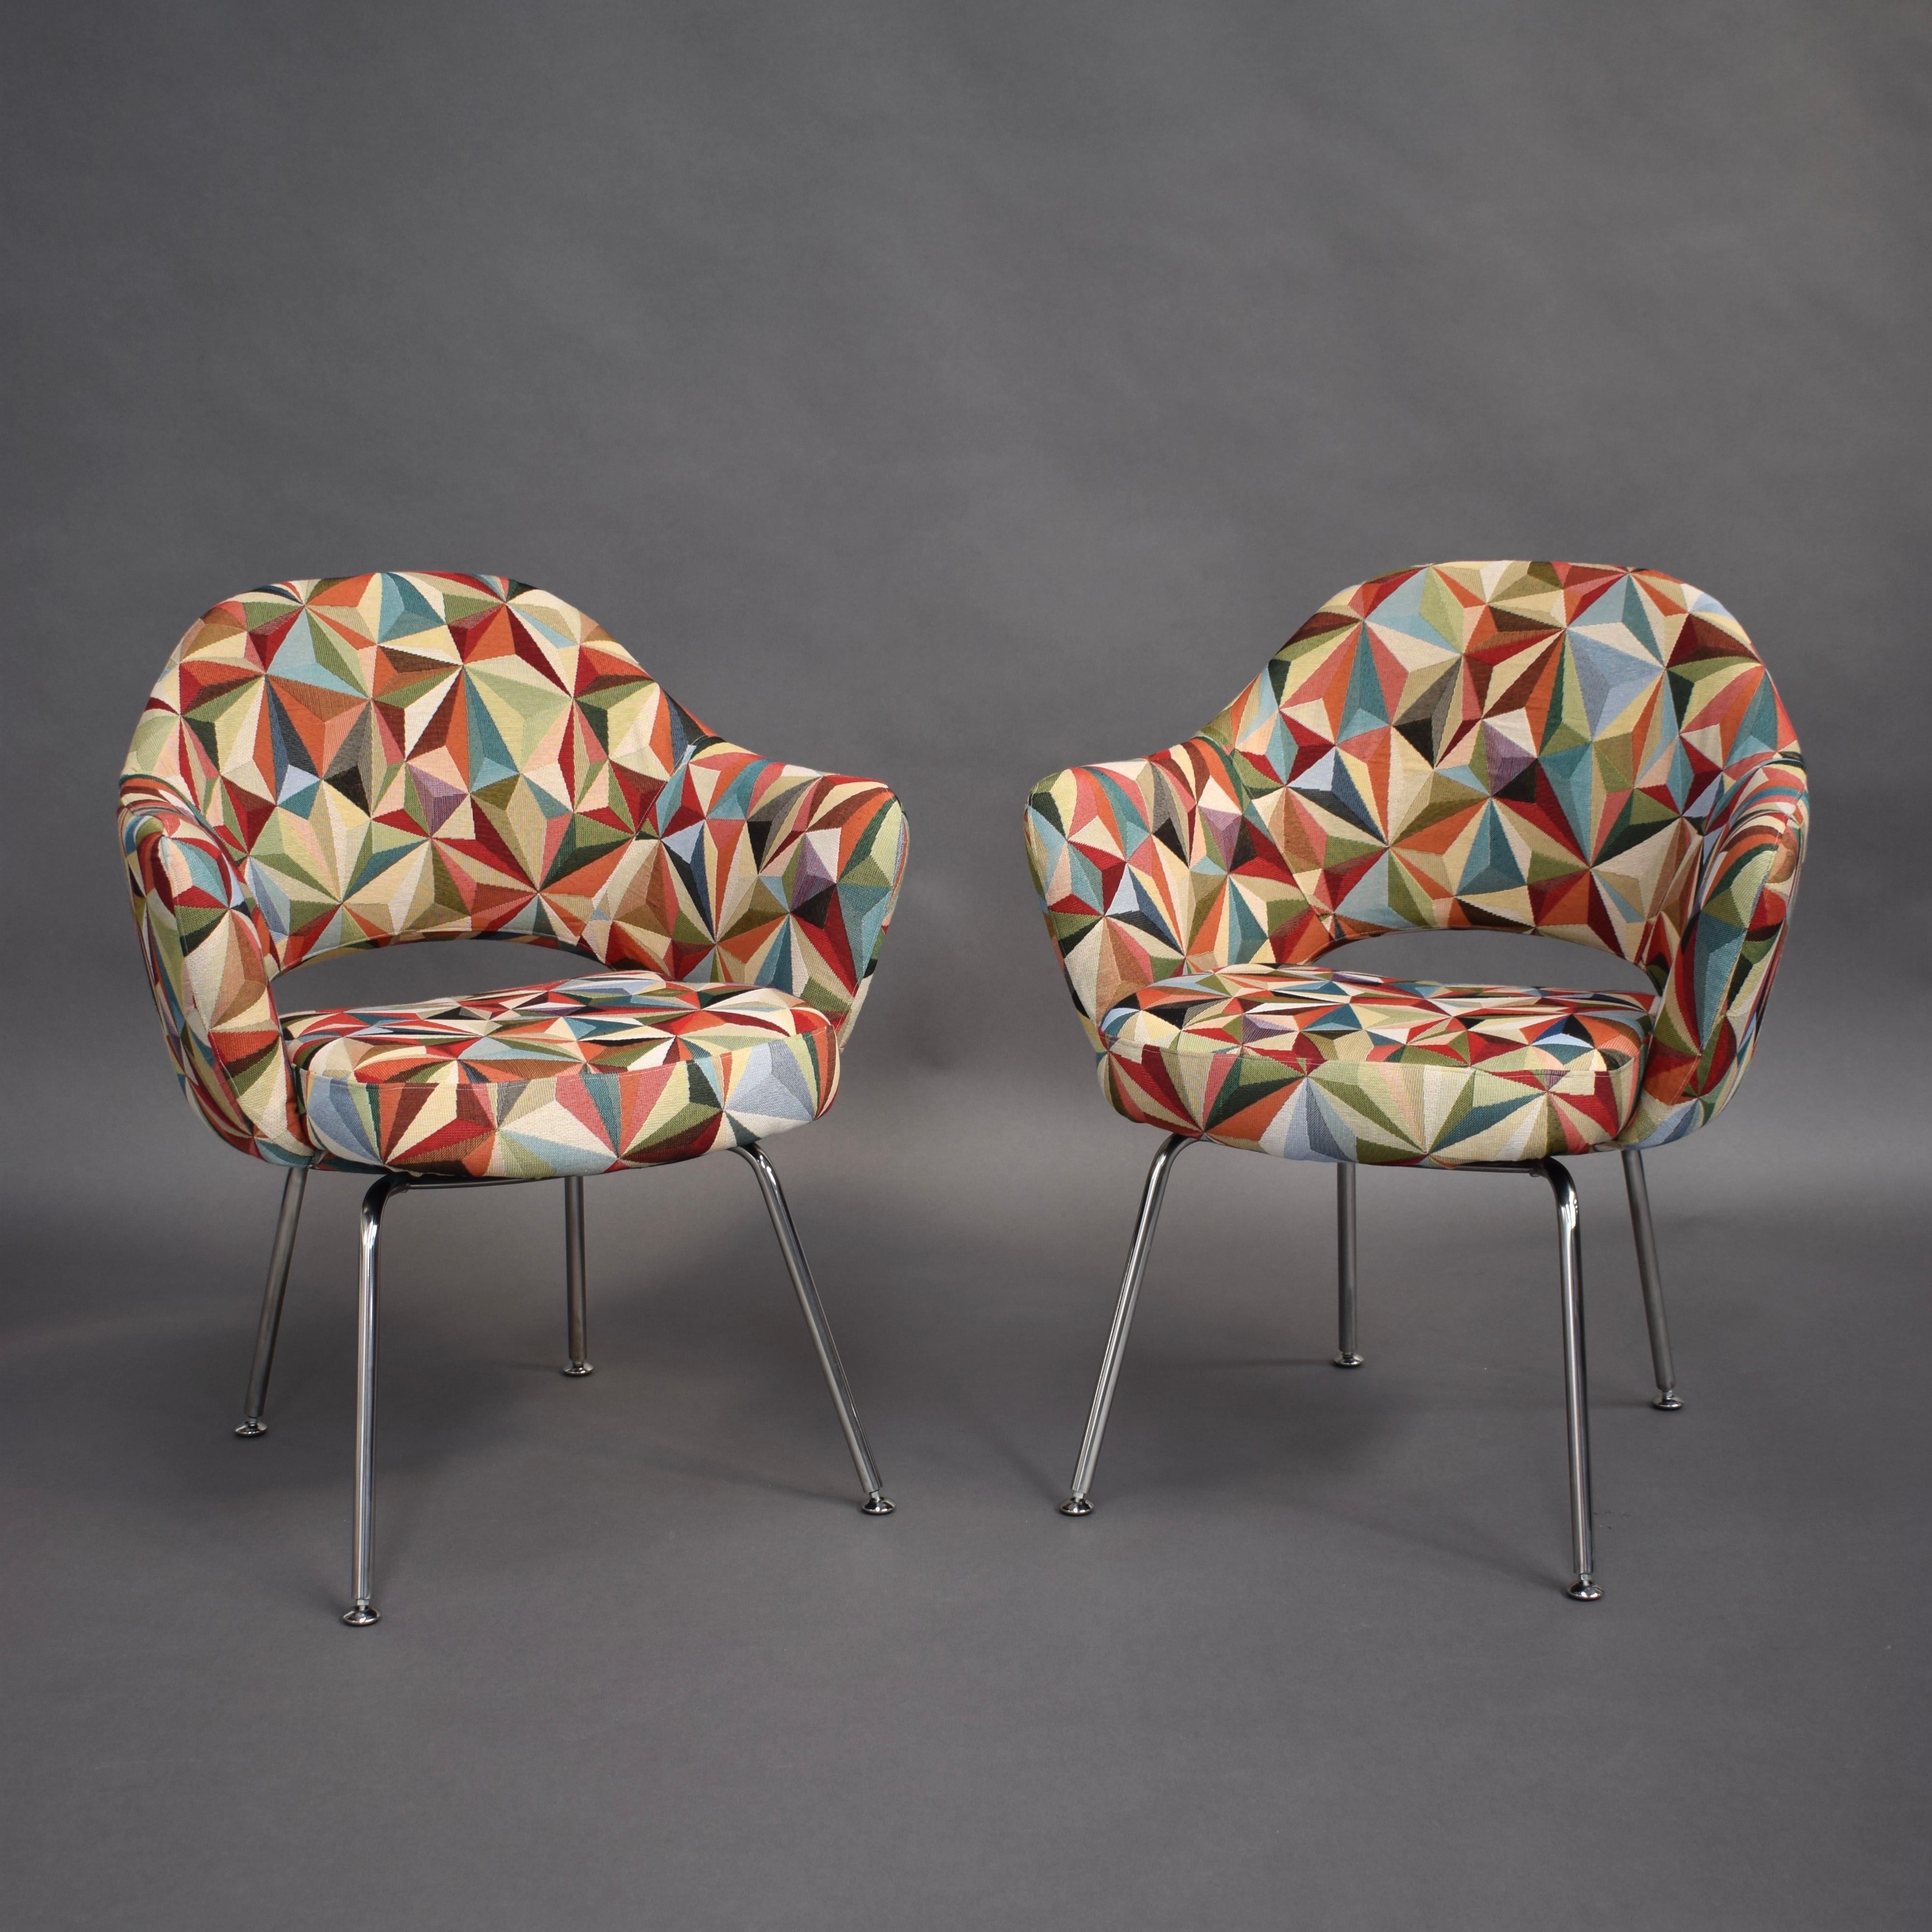 Mid-Century Modern Pair of Armchairs by Eero Saarinen for Knoll with New Upholstery, USA circa 1960